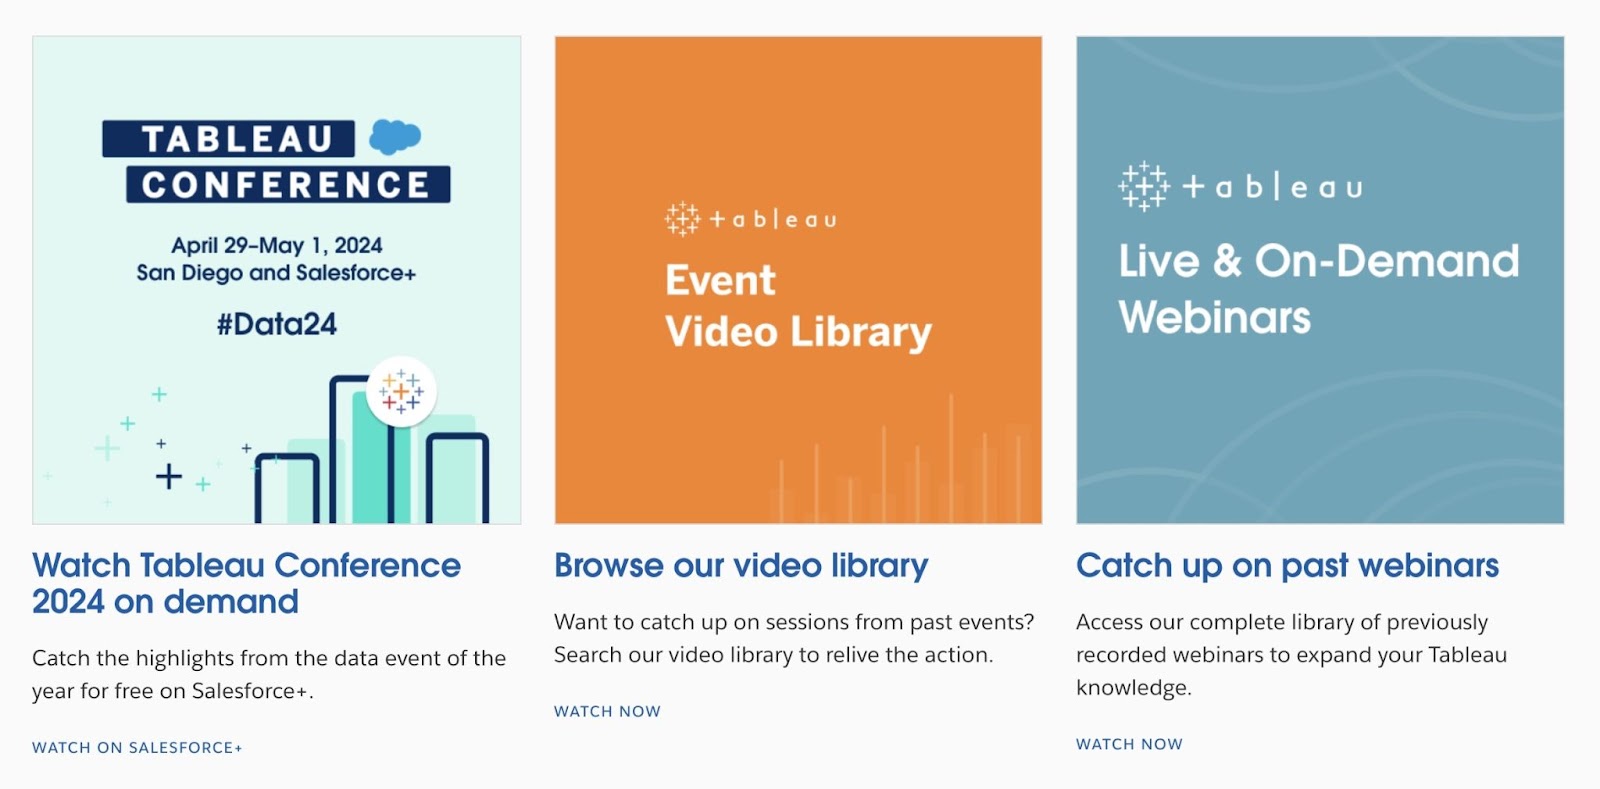 Events and conferences page on "Tableau" include links to a 2024 conference, the video library, and past webinars.